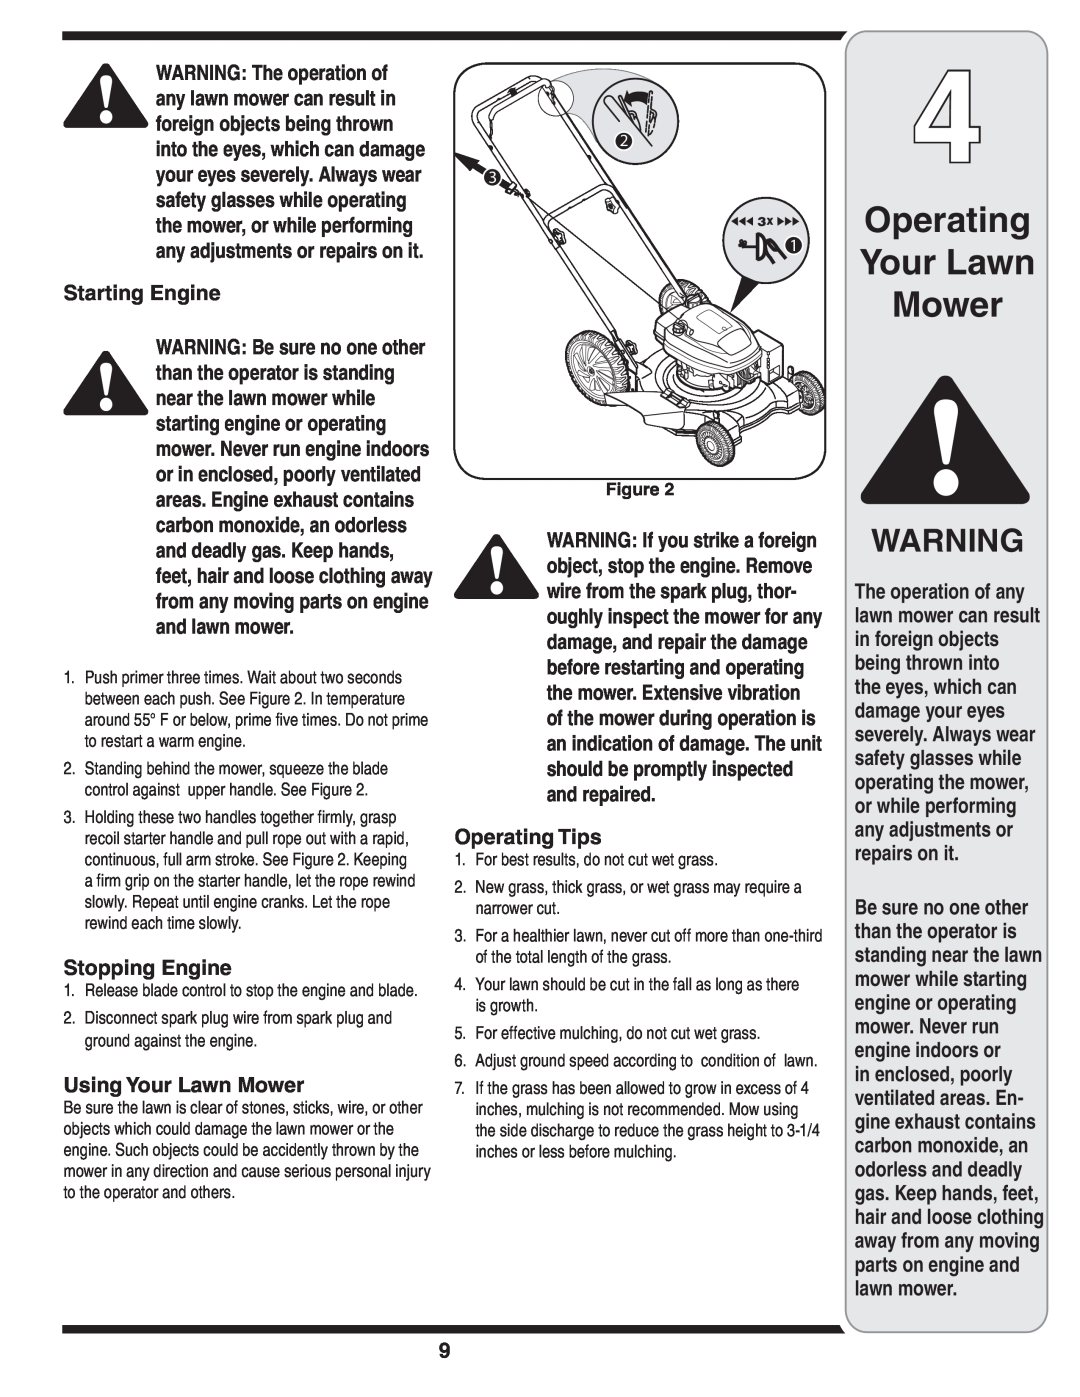 White Outdoor 500 Starting Engine, Stopping Engine, Using Your Lawn Mower, Operating Tips, Operating Your Lawn Mower 